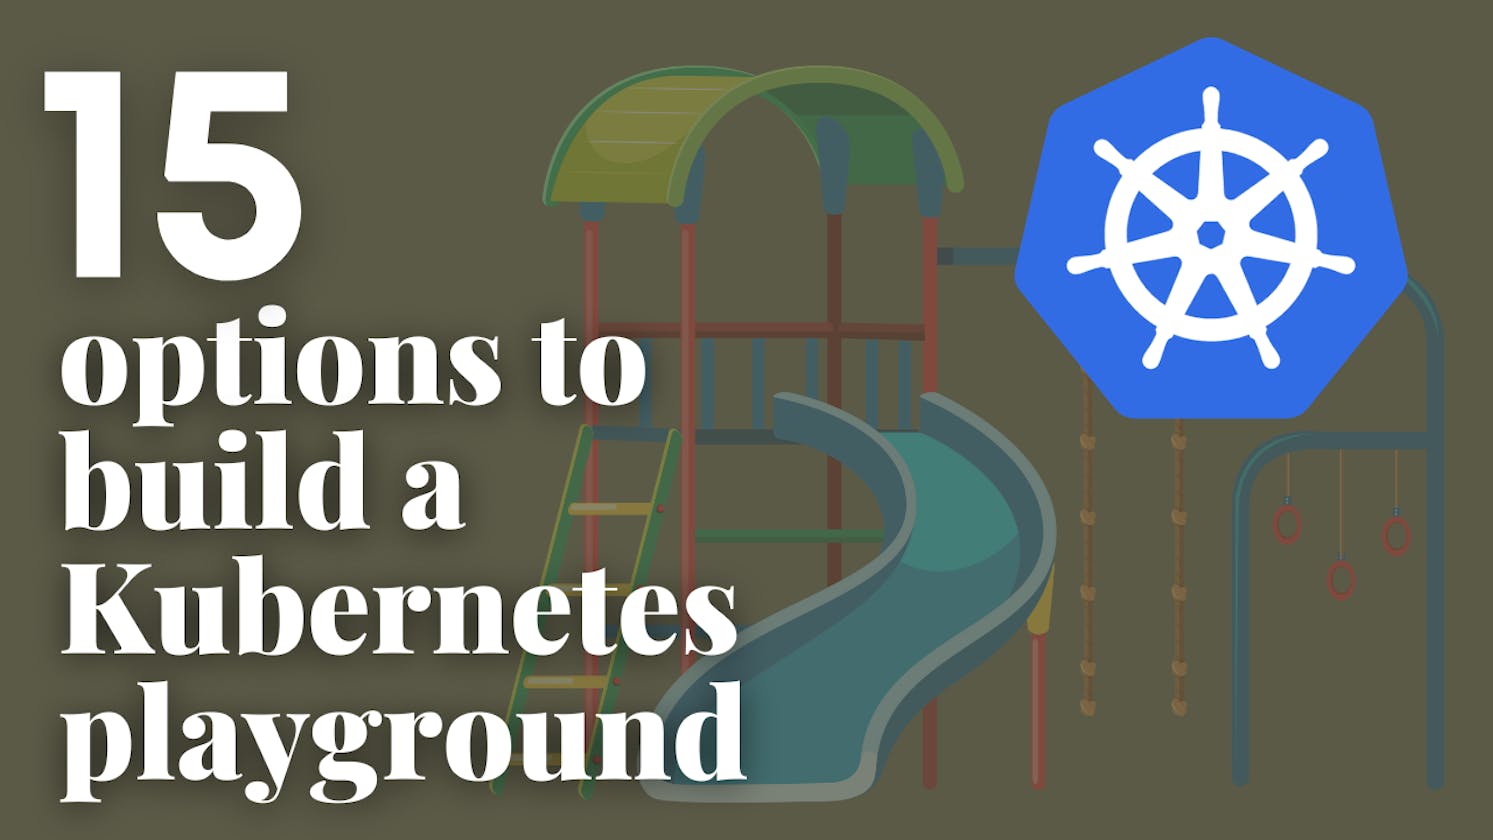 15 Options To Build A Kubernetes Playground (with Pros and Cons)